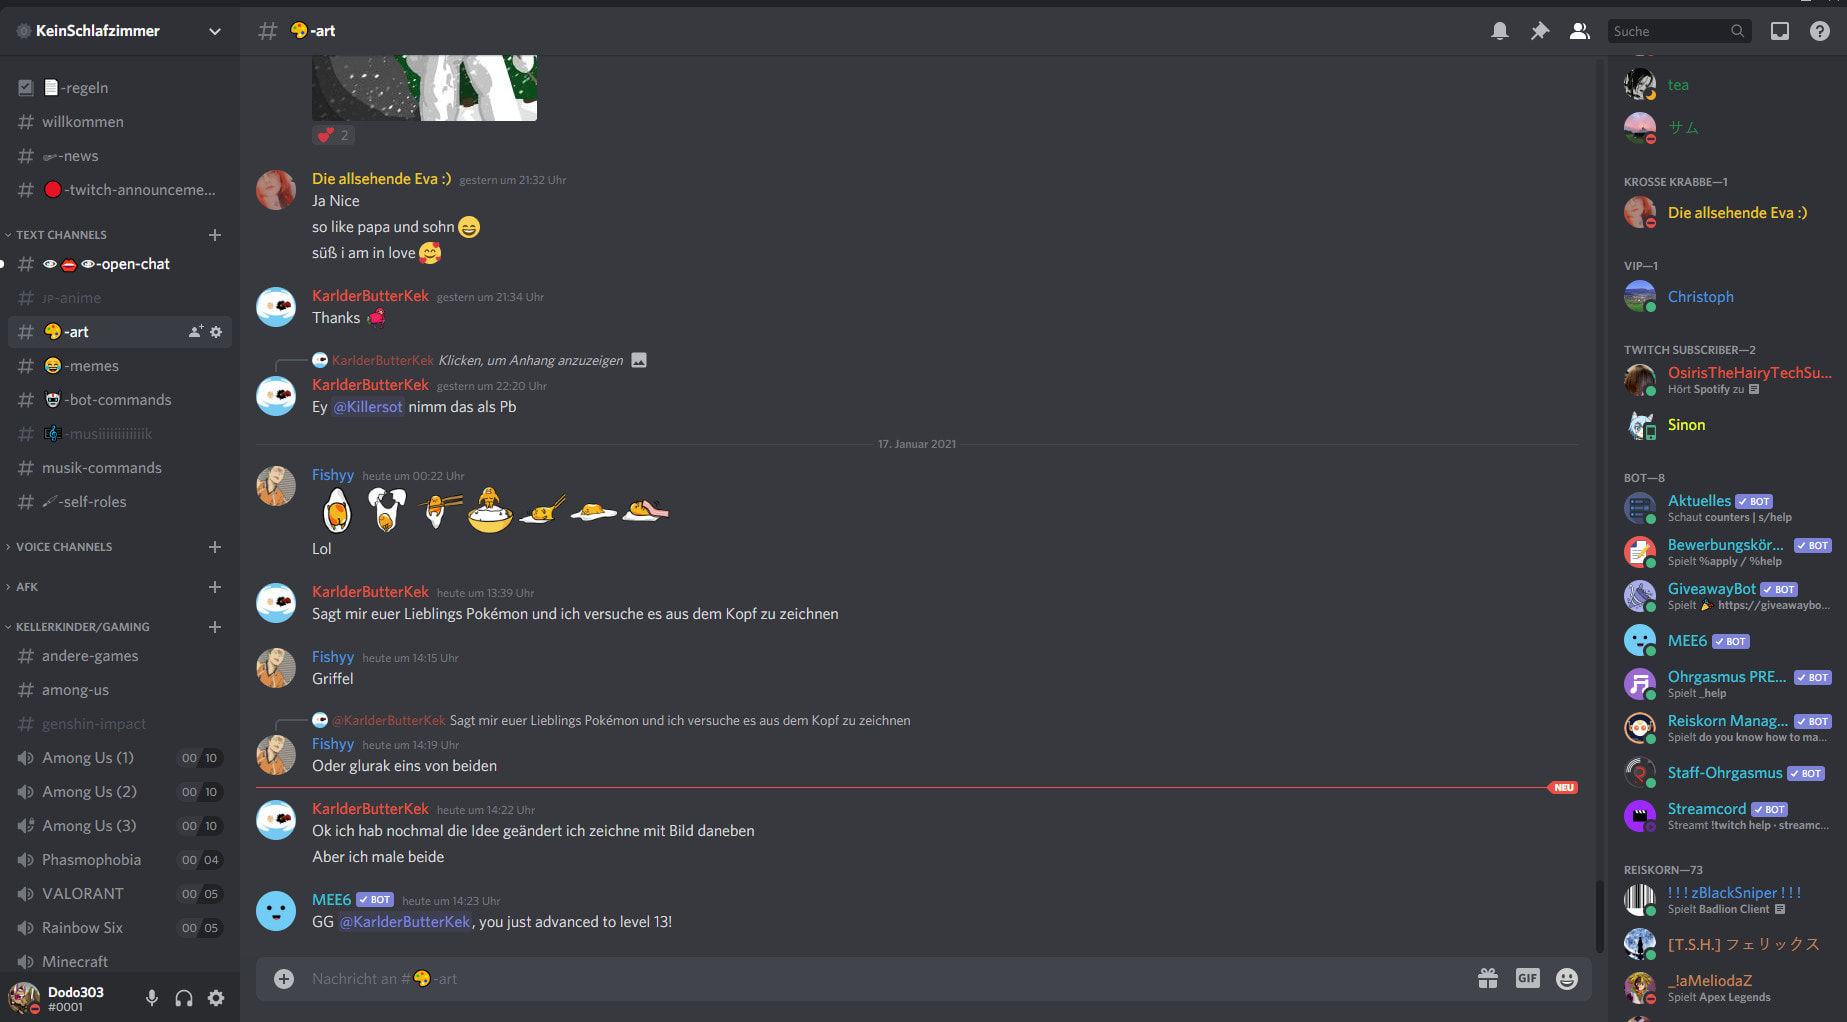 valorant-discord-for-new-players-image-to-u